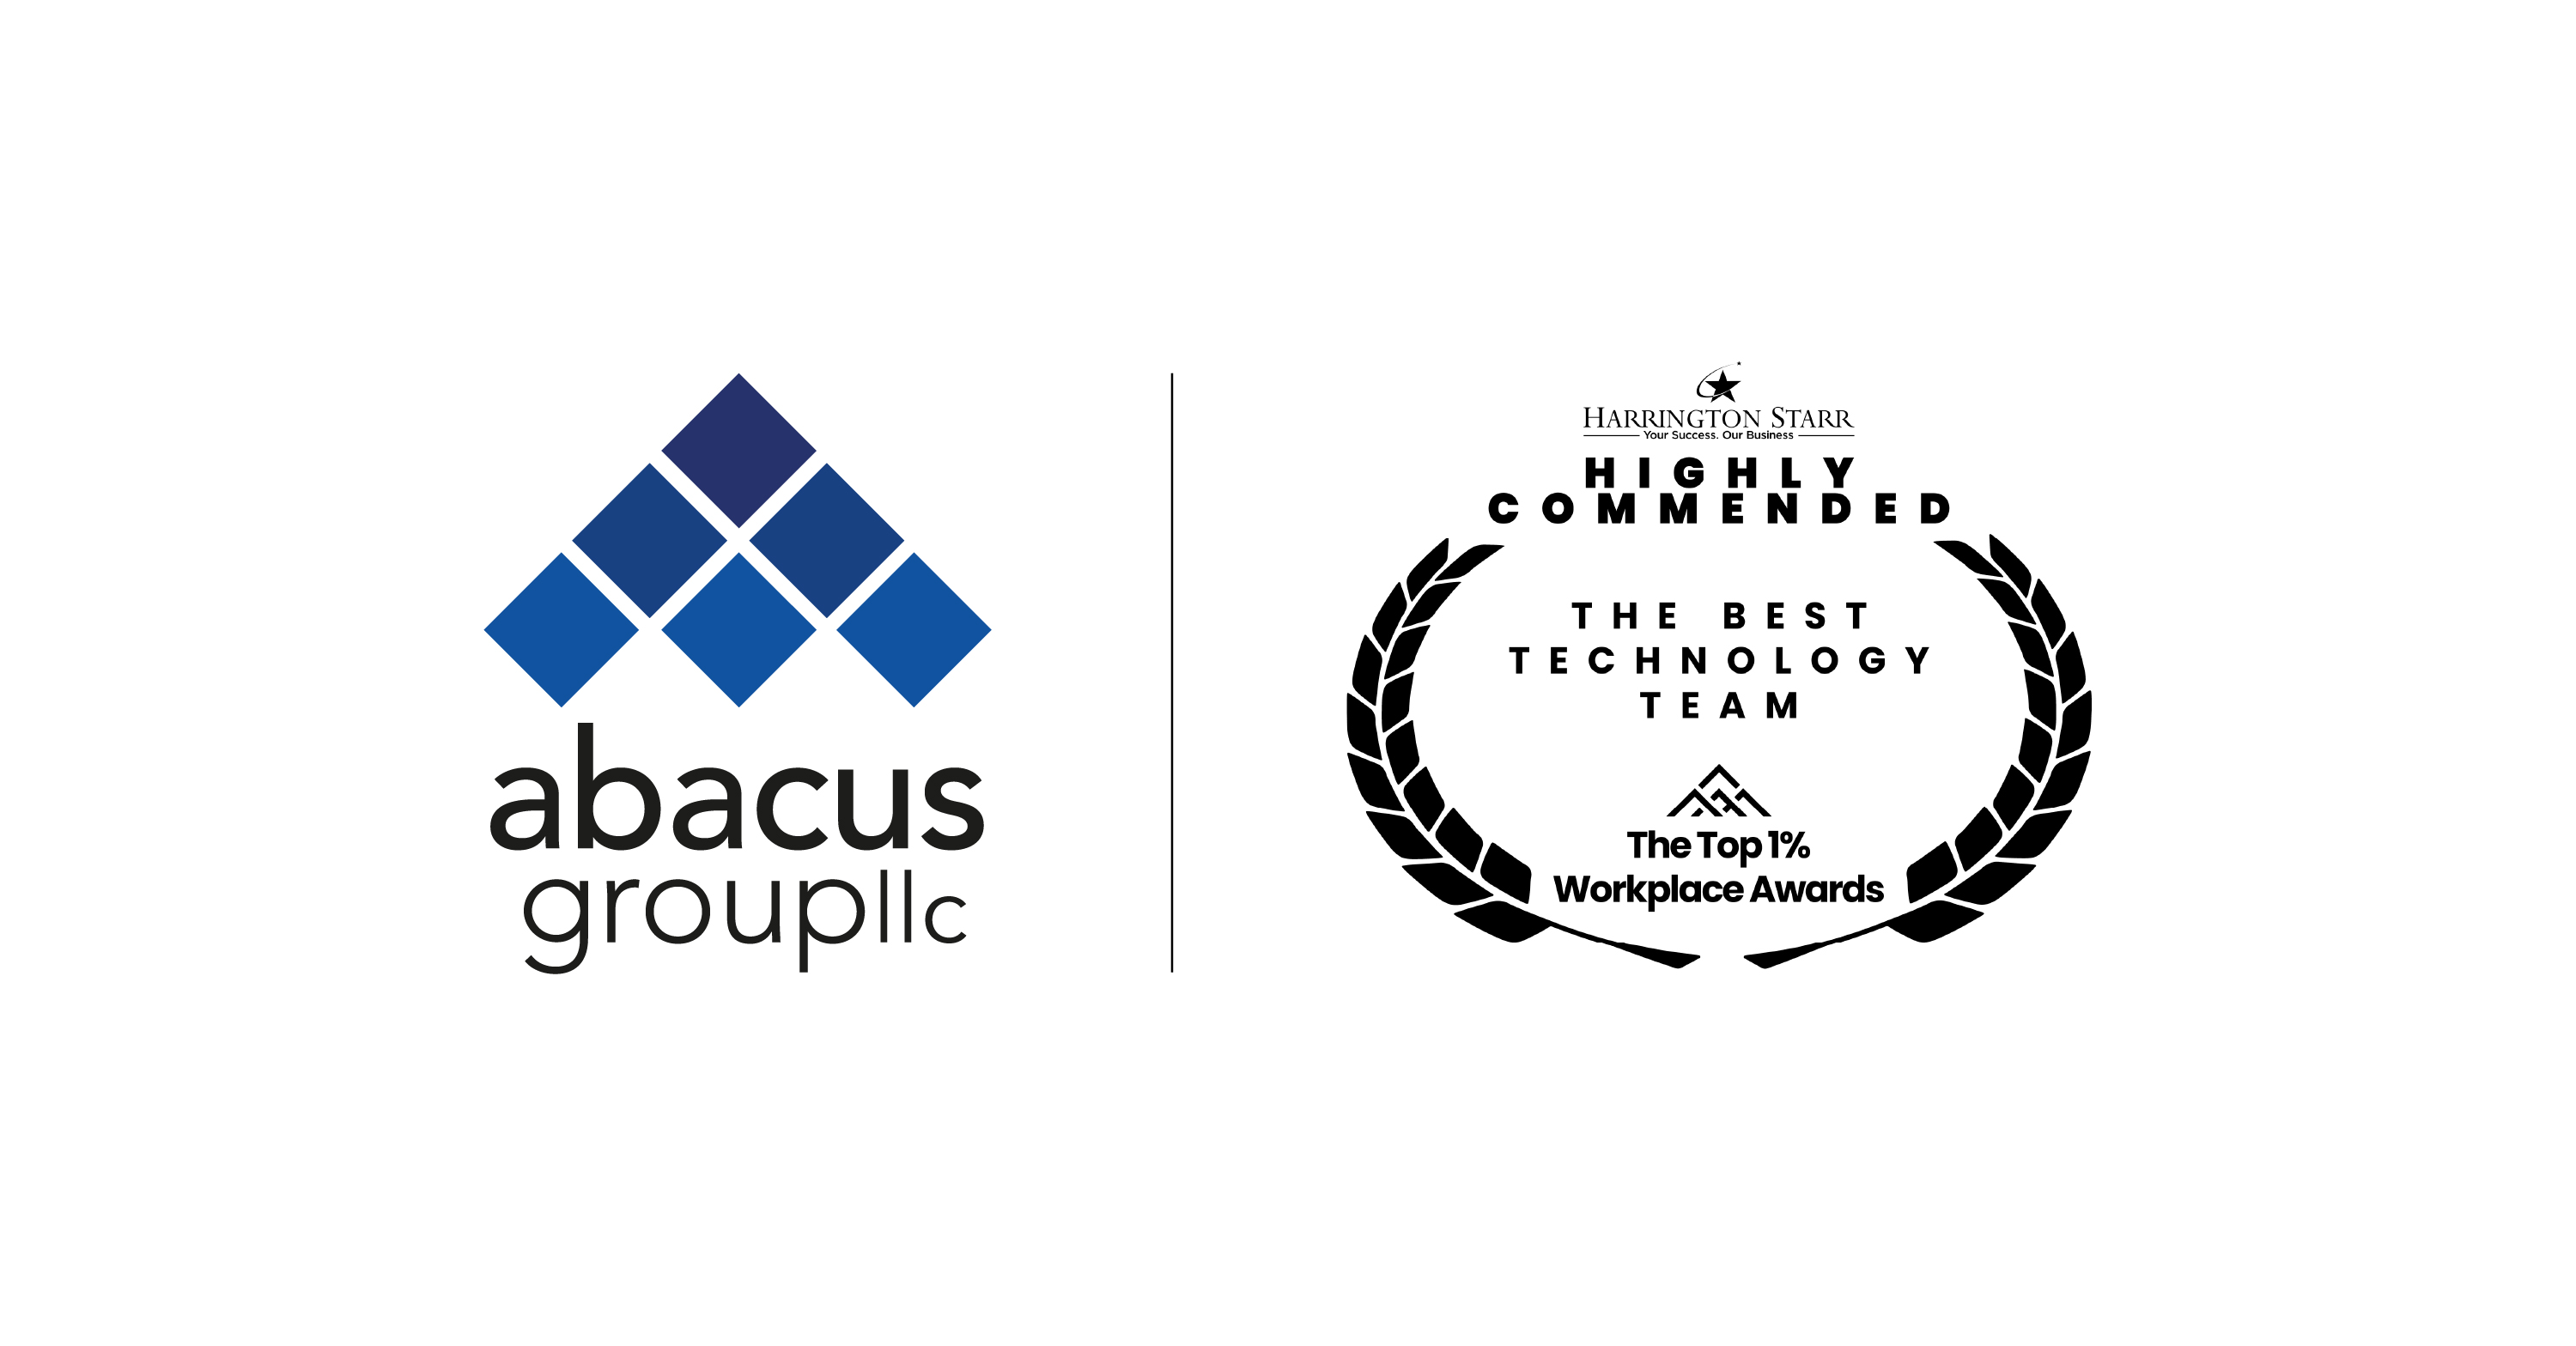 Abacus Group Recognized by Harrington Starr as a Top 1% Workplace with the Best Technology Team